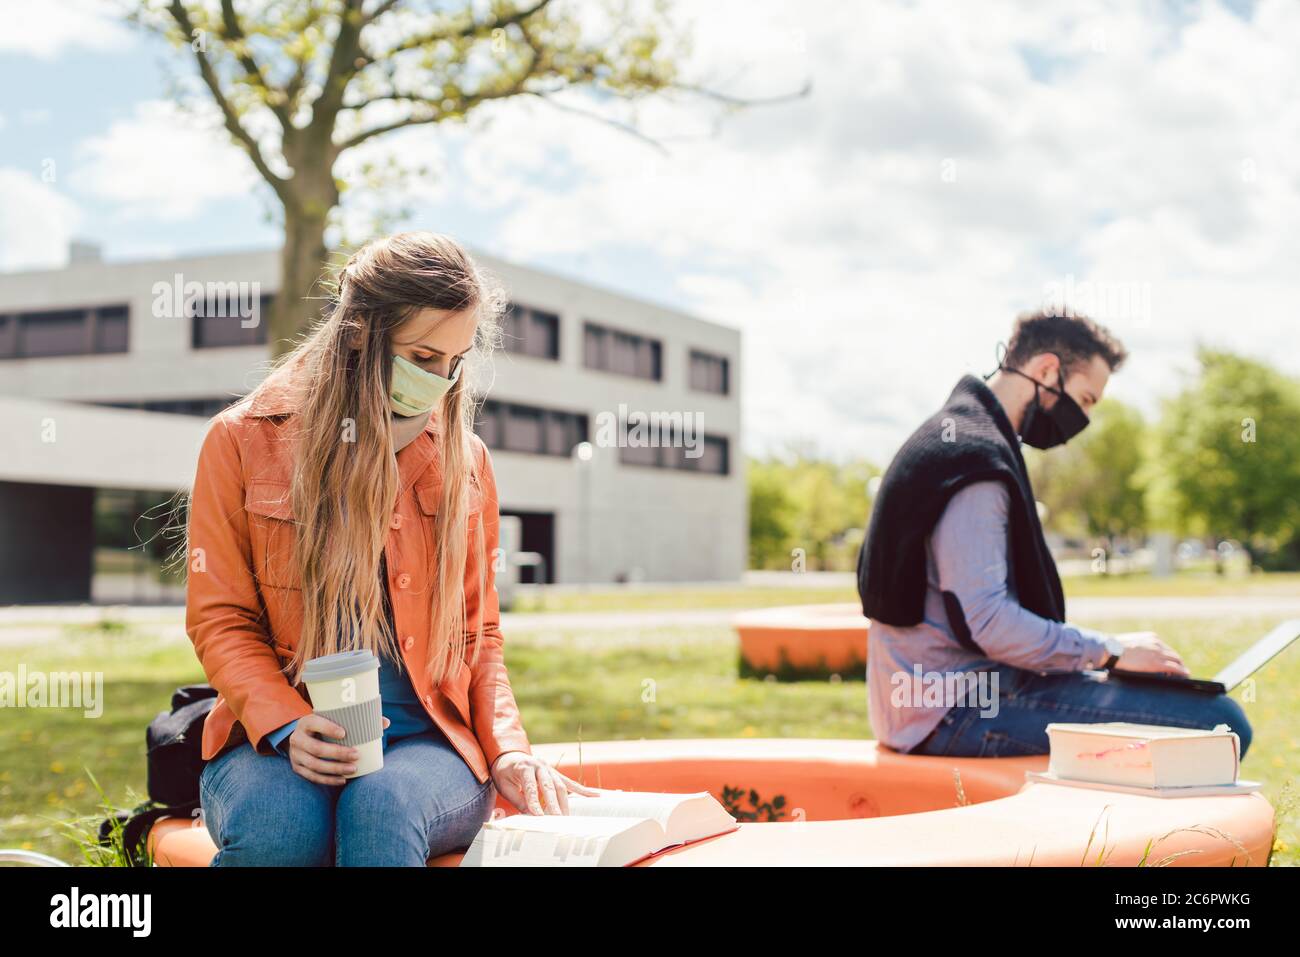 Students learning on campus keeping social distance Stock Photo